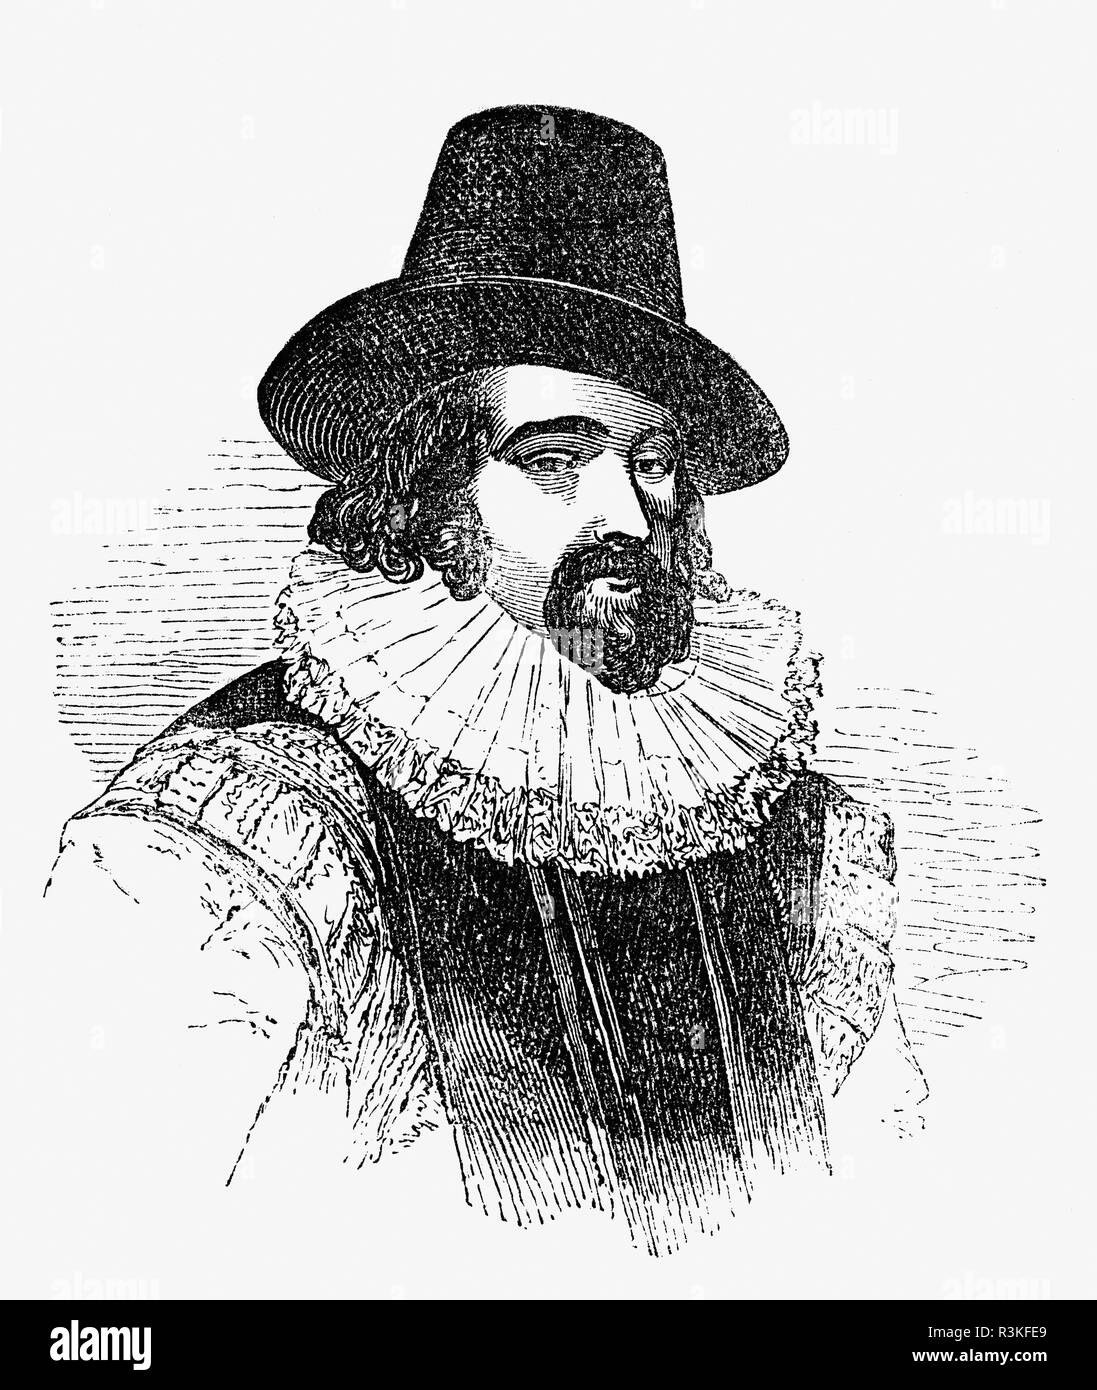 Francis Bacon, (1561-1626) was an English philosopher, statesman, scientist, jurist, orator, and author. He served both as Attorney General and as Lord Chancellor of England. After his death, his works remained influential in the development of the scientific method during the scientific revolution. Called the father of empiricism,  his works argued for the possibility of scientific knowledge based only upon inductive reasoning and careful observation of events in nature. Stock Photo